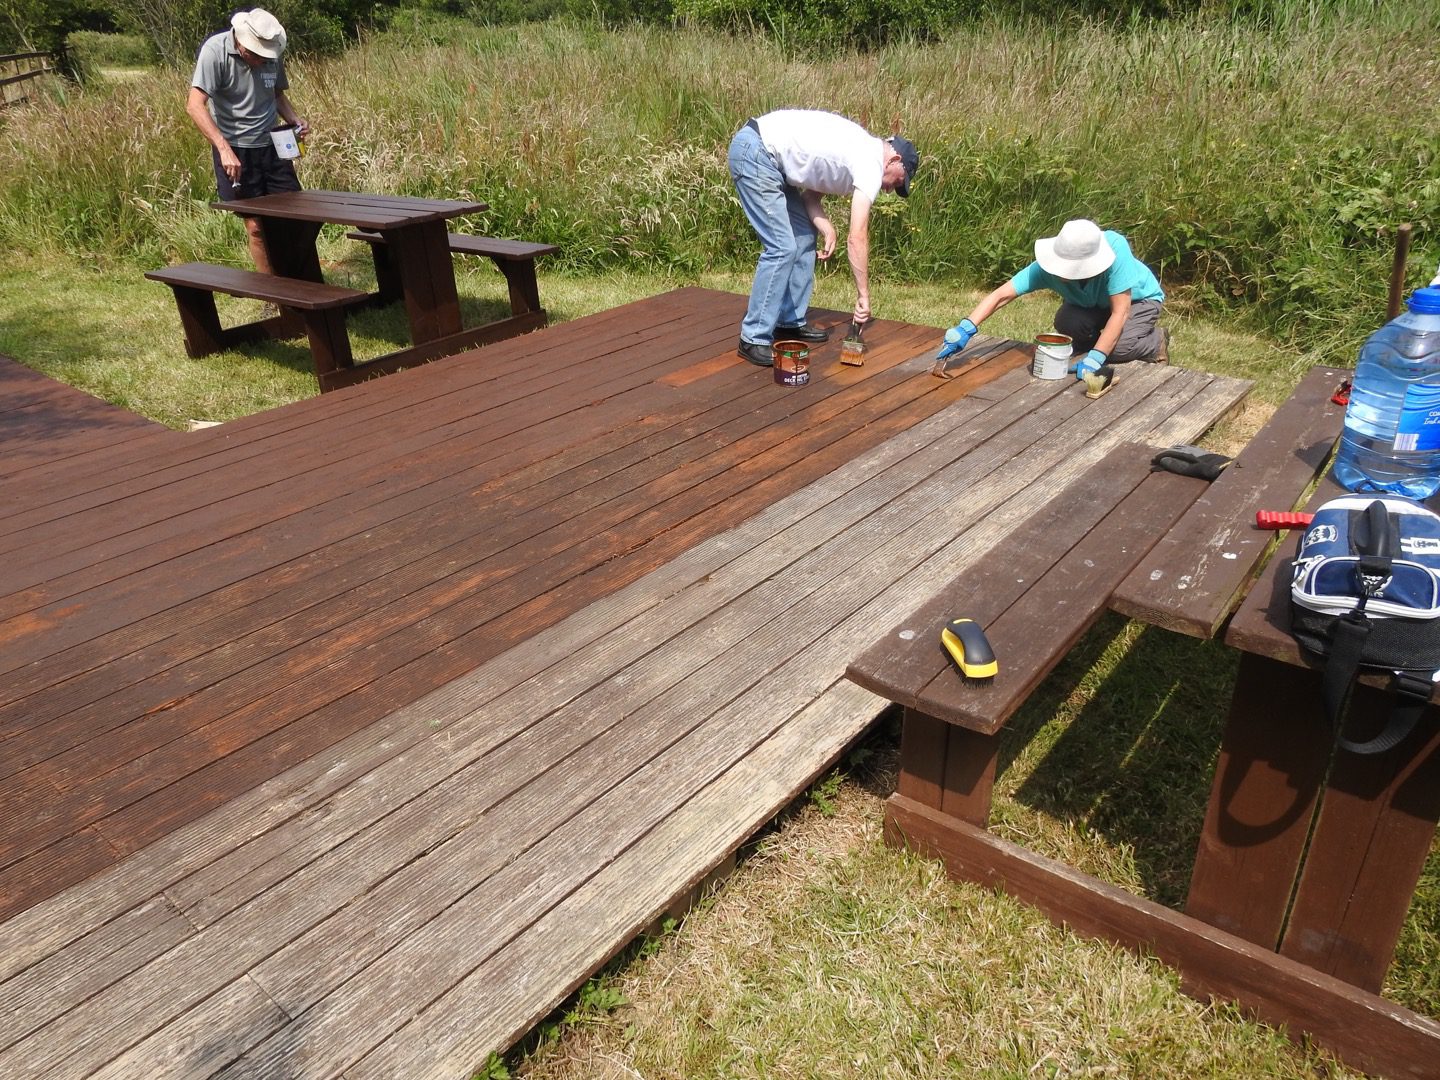 Volunteers-painting-a-wooden-boardwalk-in-a-reserve